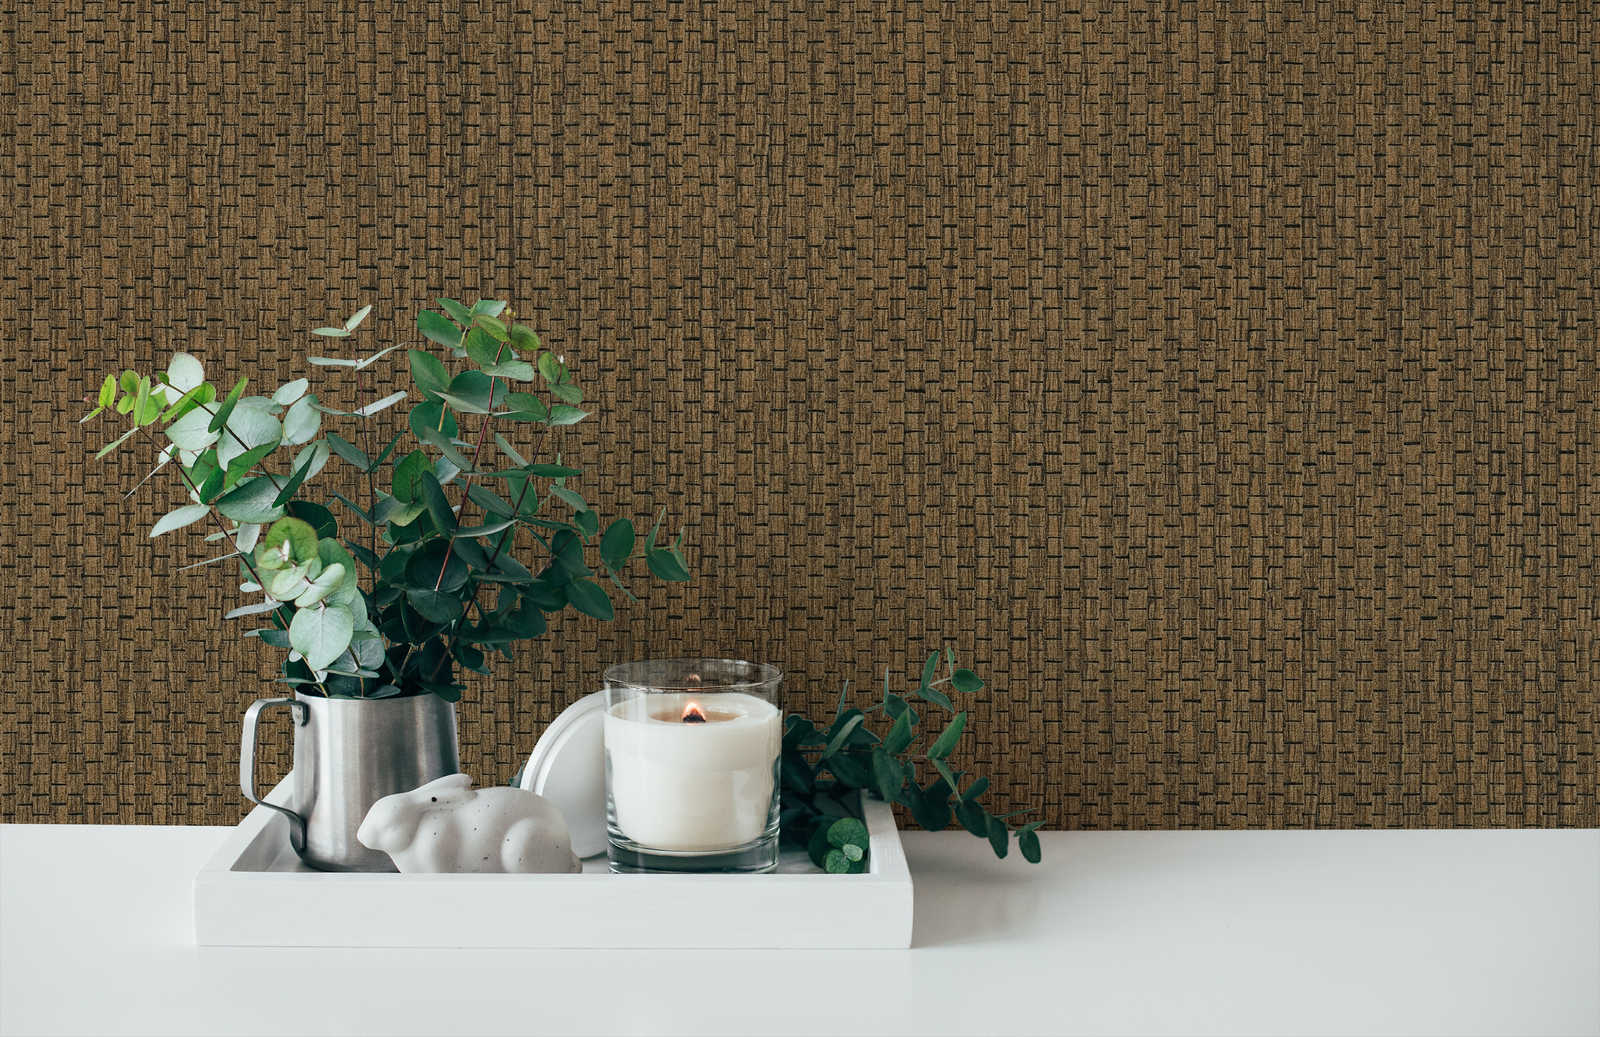             Wallpaper with raffia natural fabric pattern - Brown
        